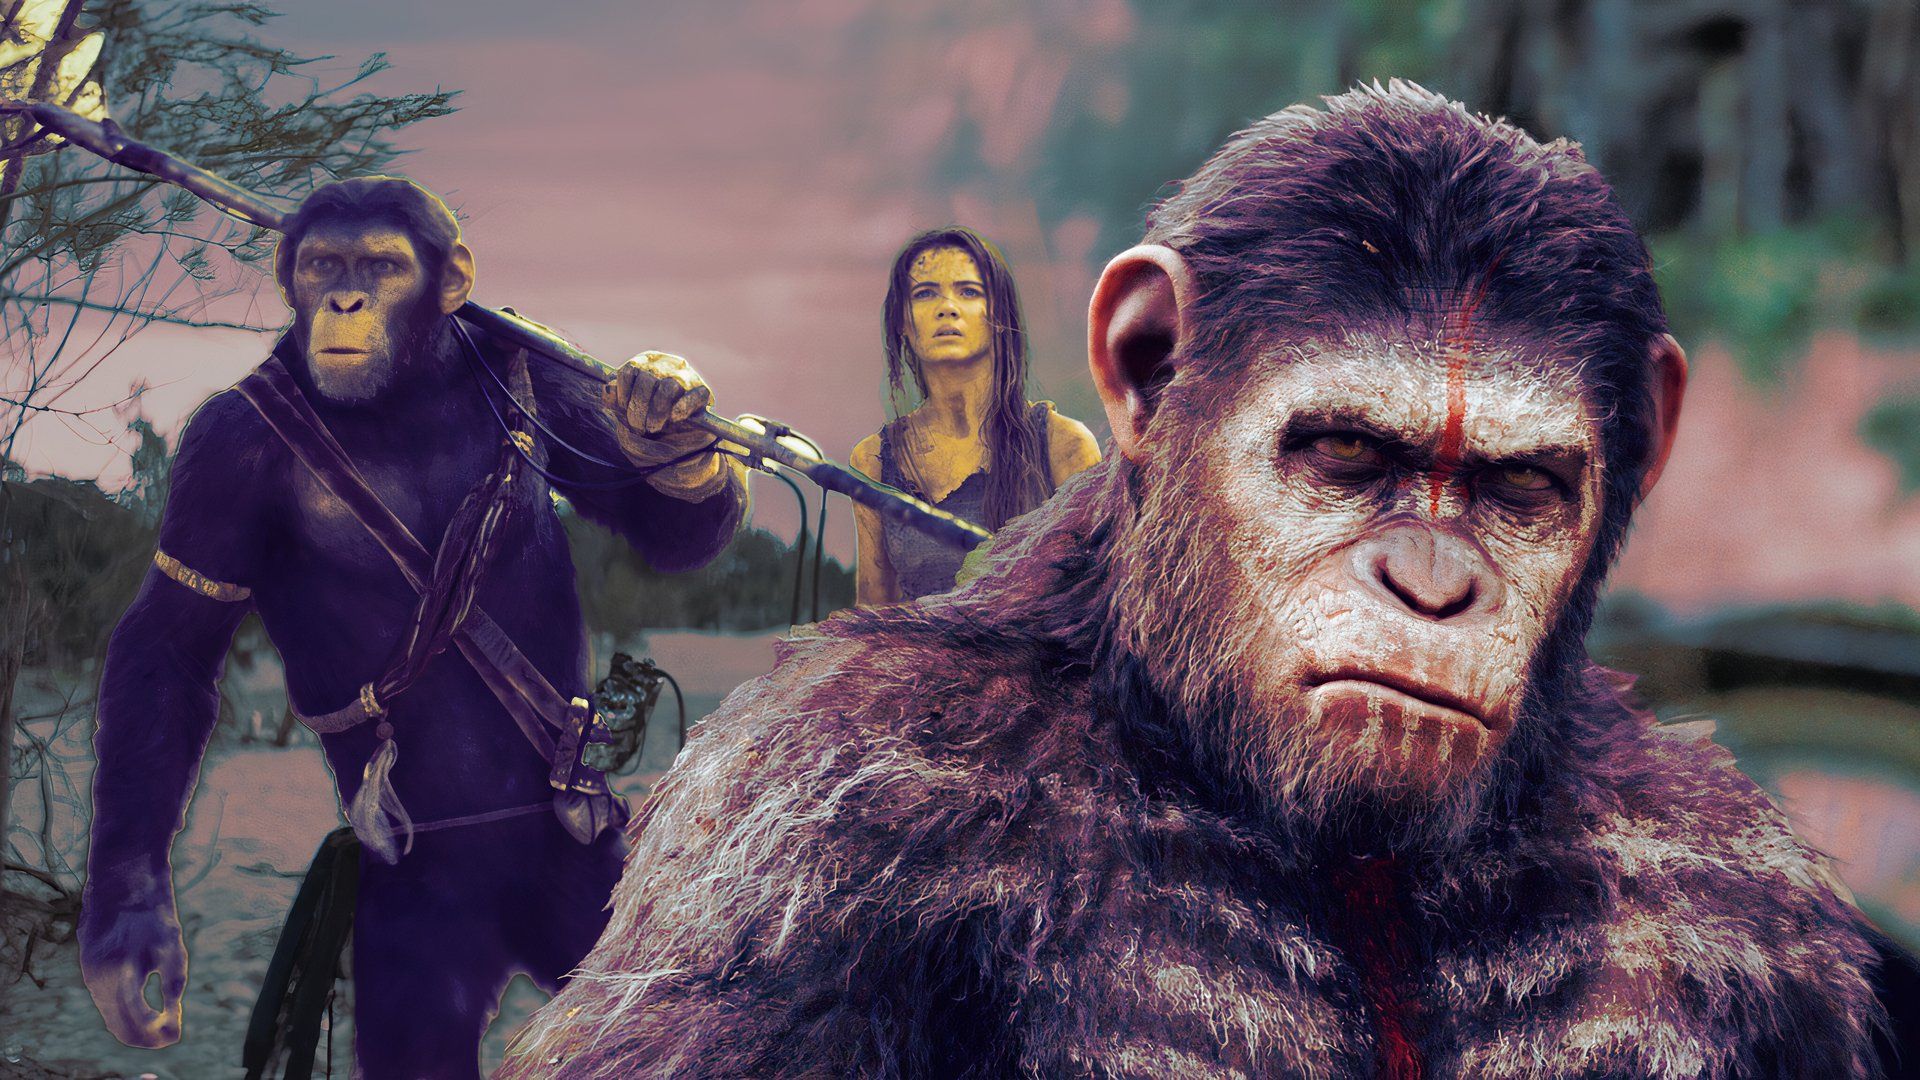 An edited image of Caesar, Noa, and Mae in Dawn of the Planet of the Apes and Kingdom of the Planet of the Apes